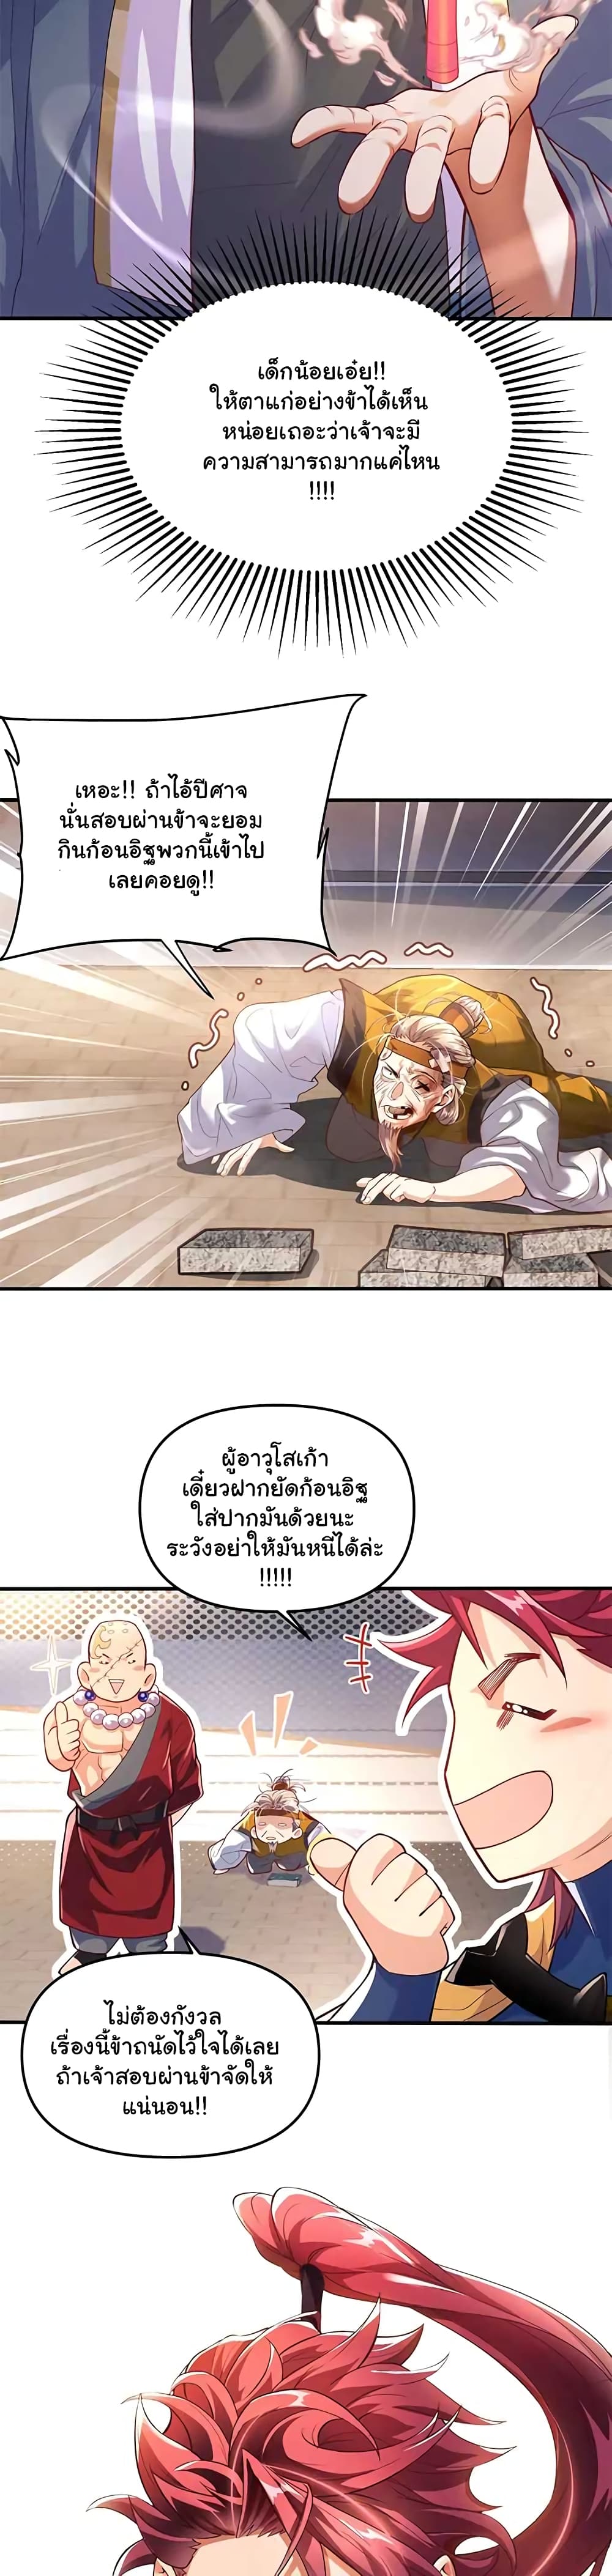 Undercover for Ten Years, I Became a Great Villain of the Demon Sect 3 แปลไทย